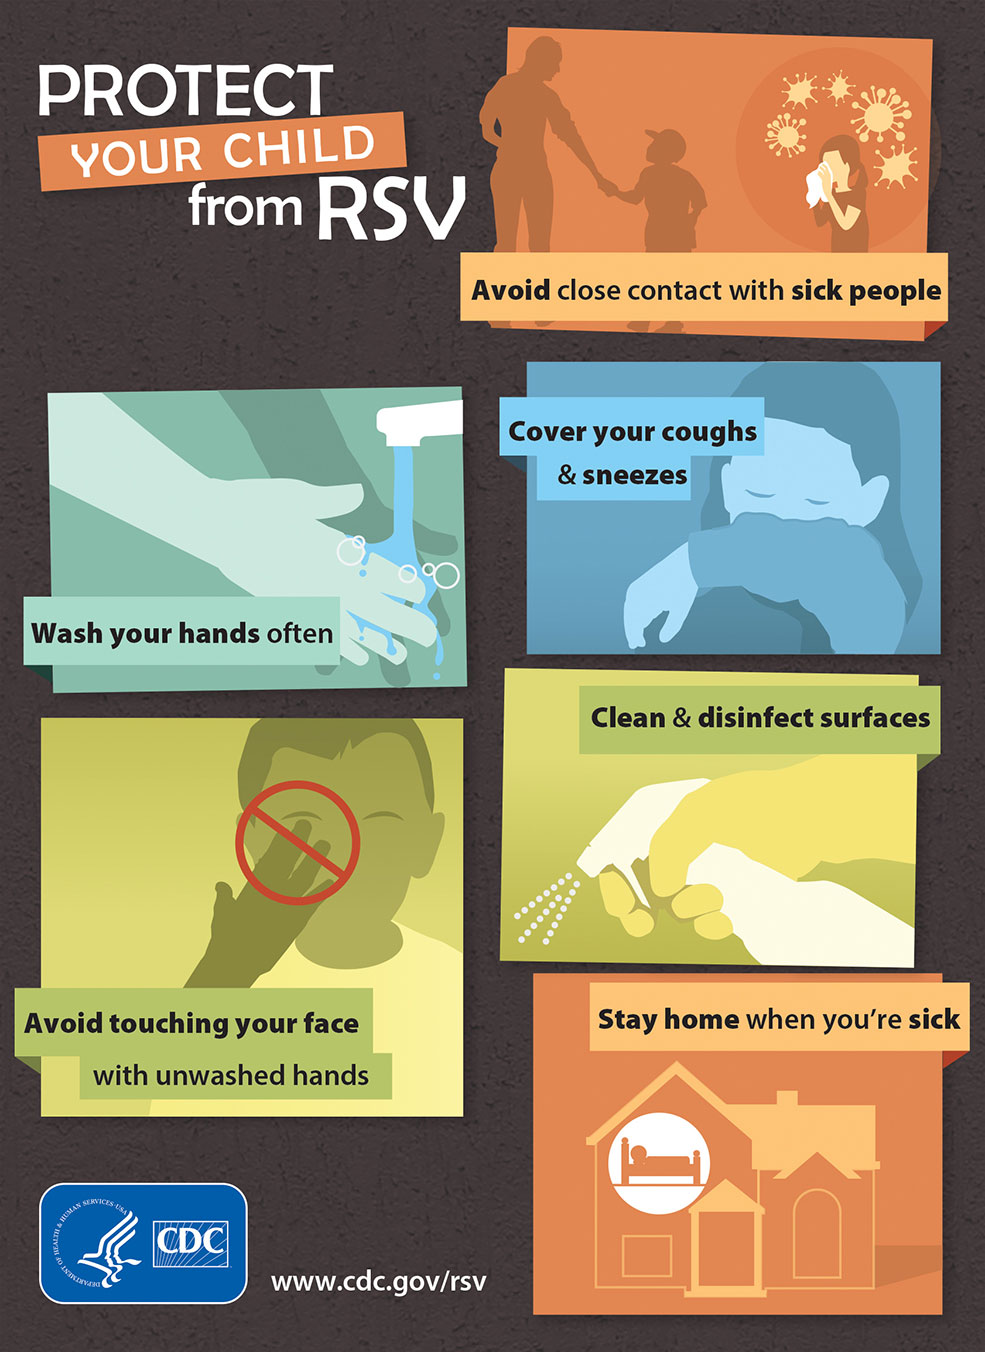 Protect Your Child from RSV Infographic CDC